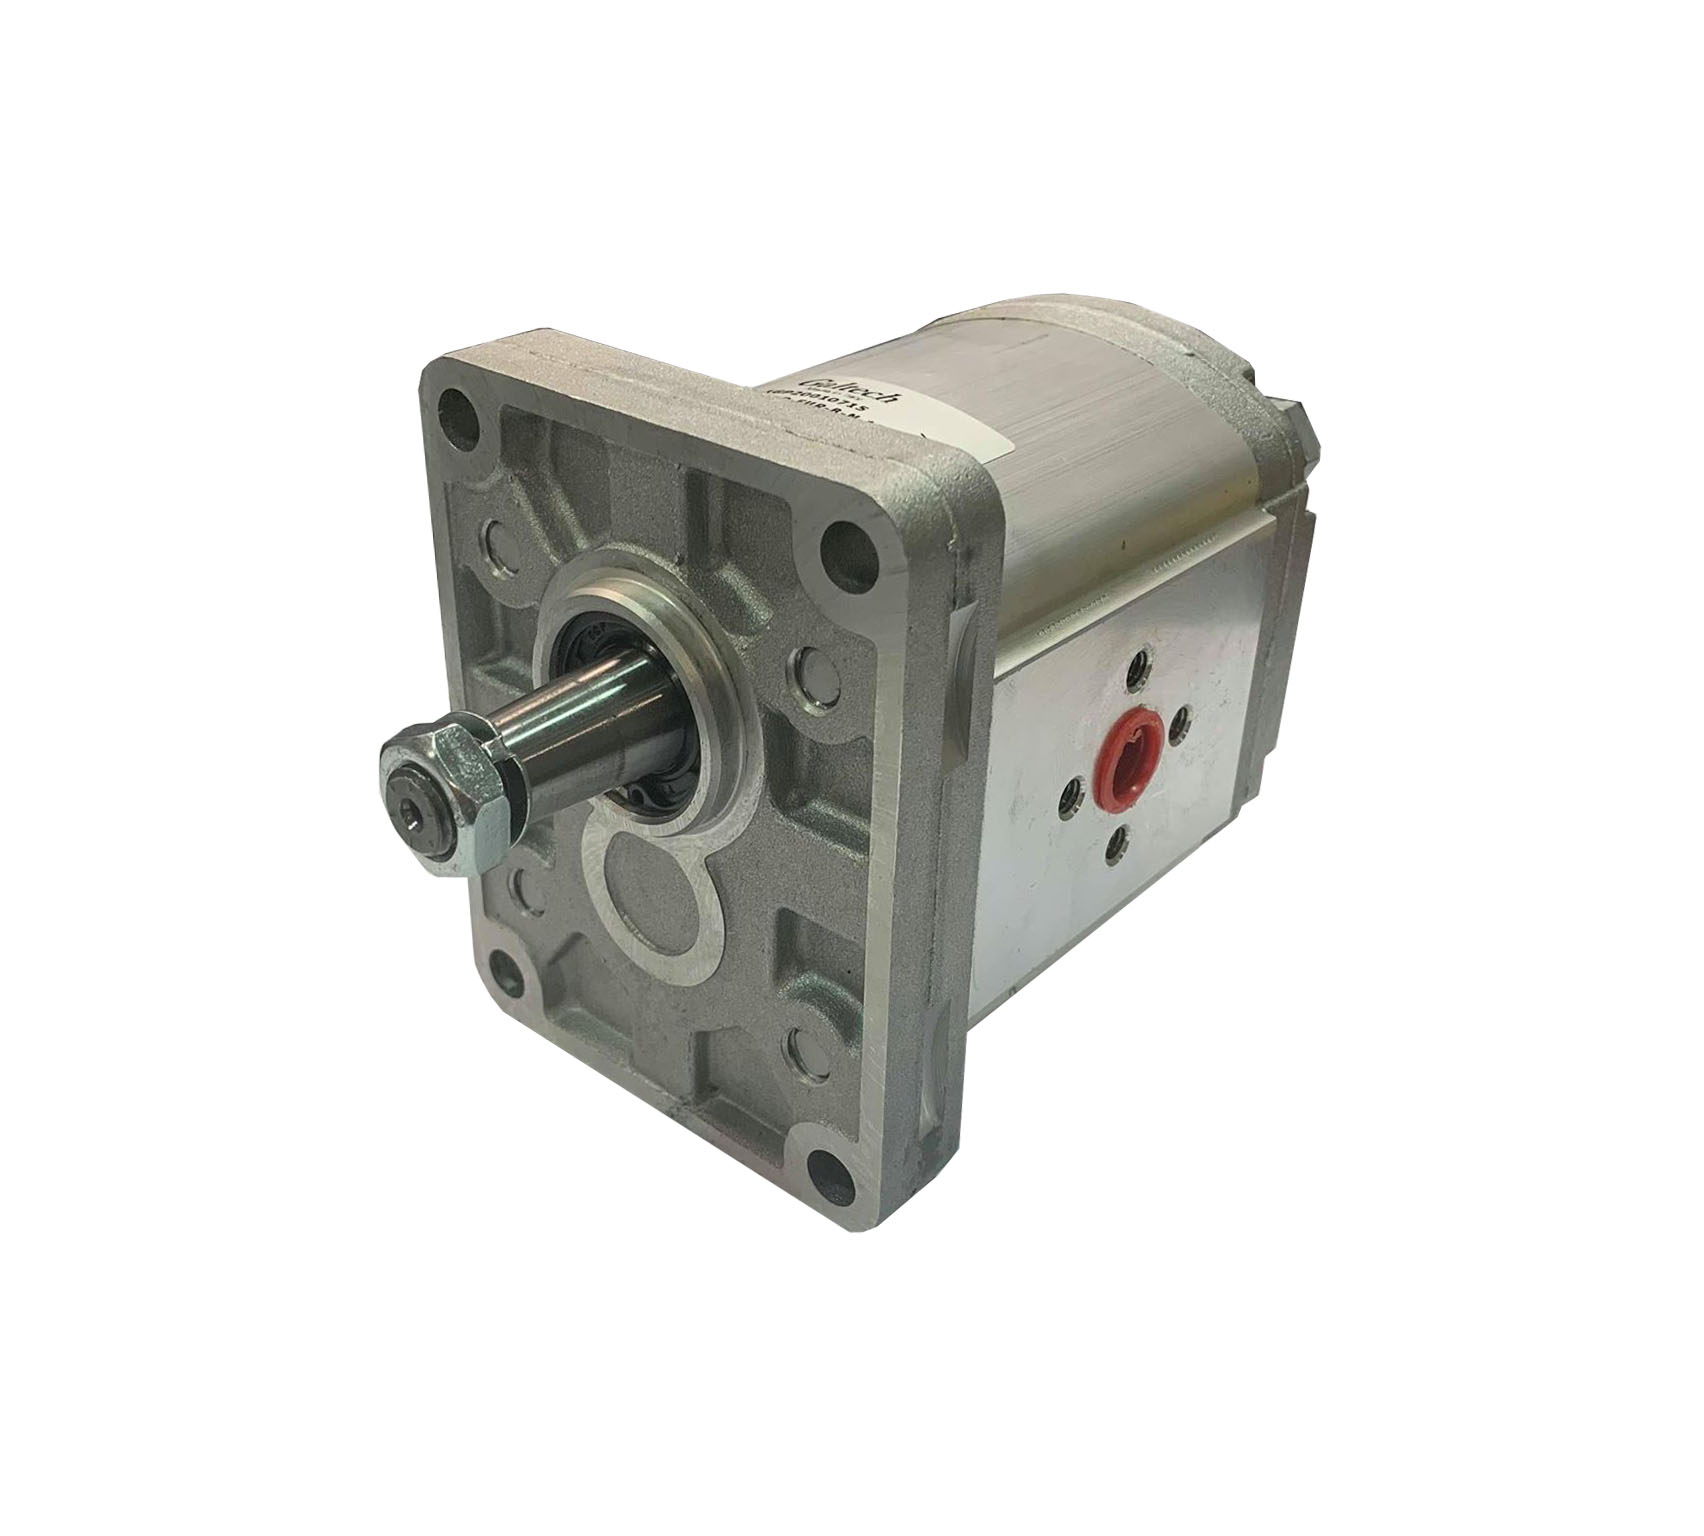 Hydraulic Group 2 Gear Motor, Reversible, 16CC, Elbow Ports